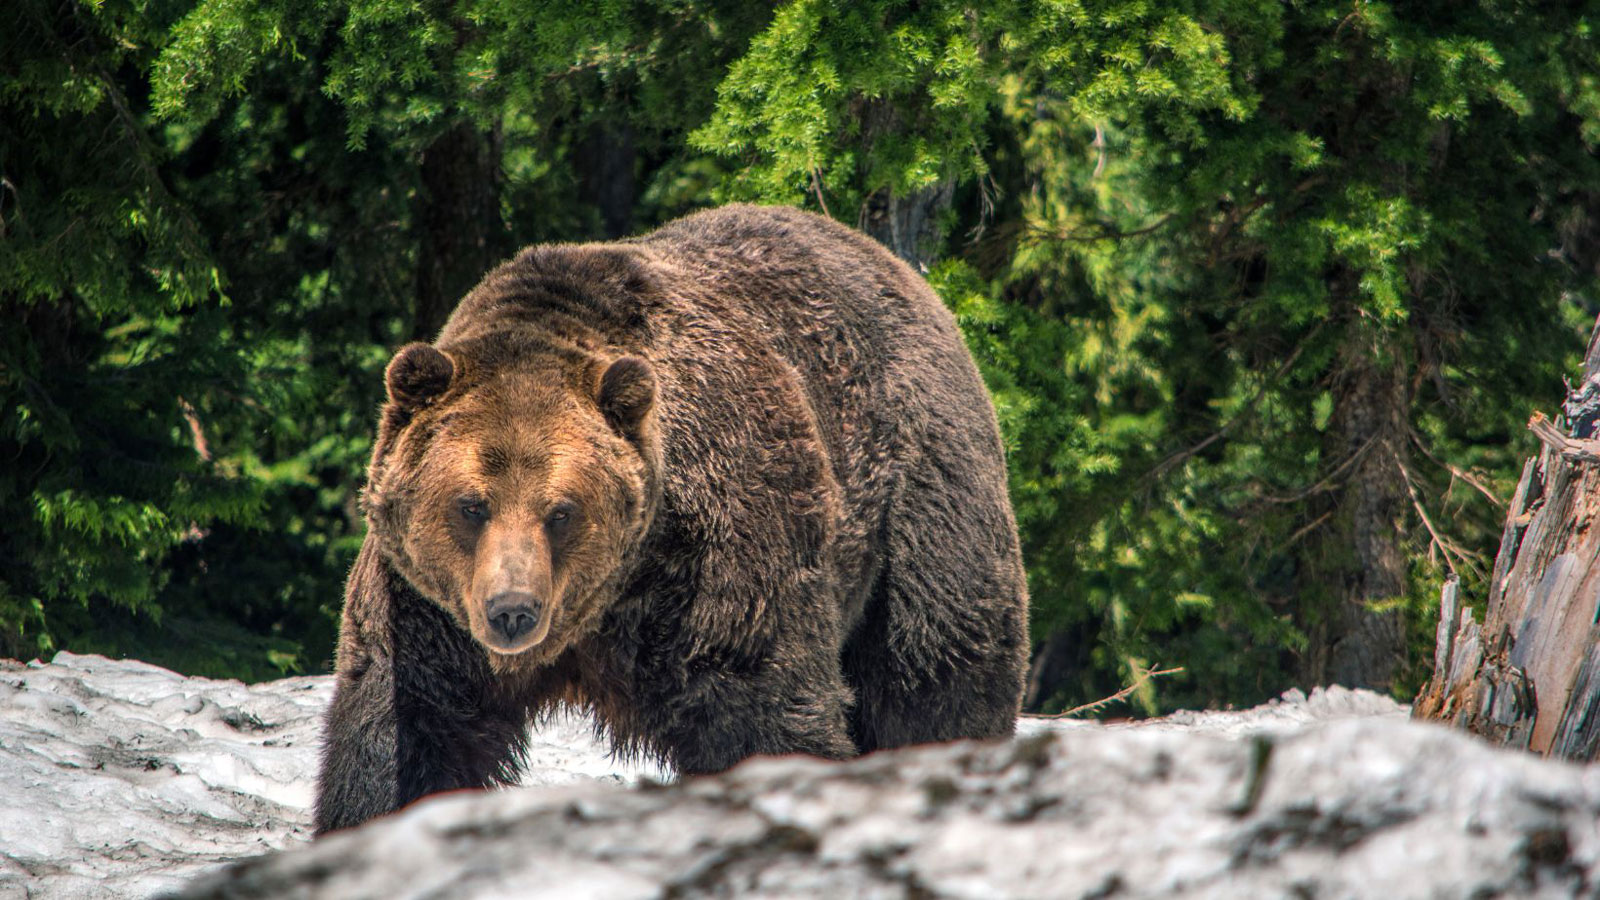 Commissioners submit comments to federal government on grizzly bear restoration plan